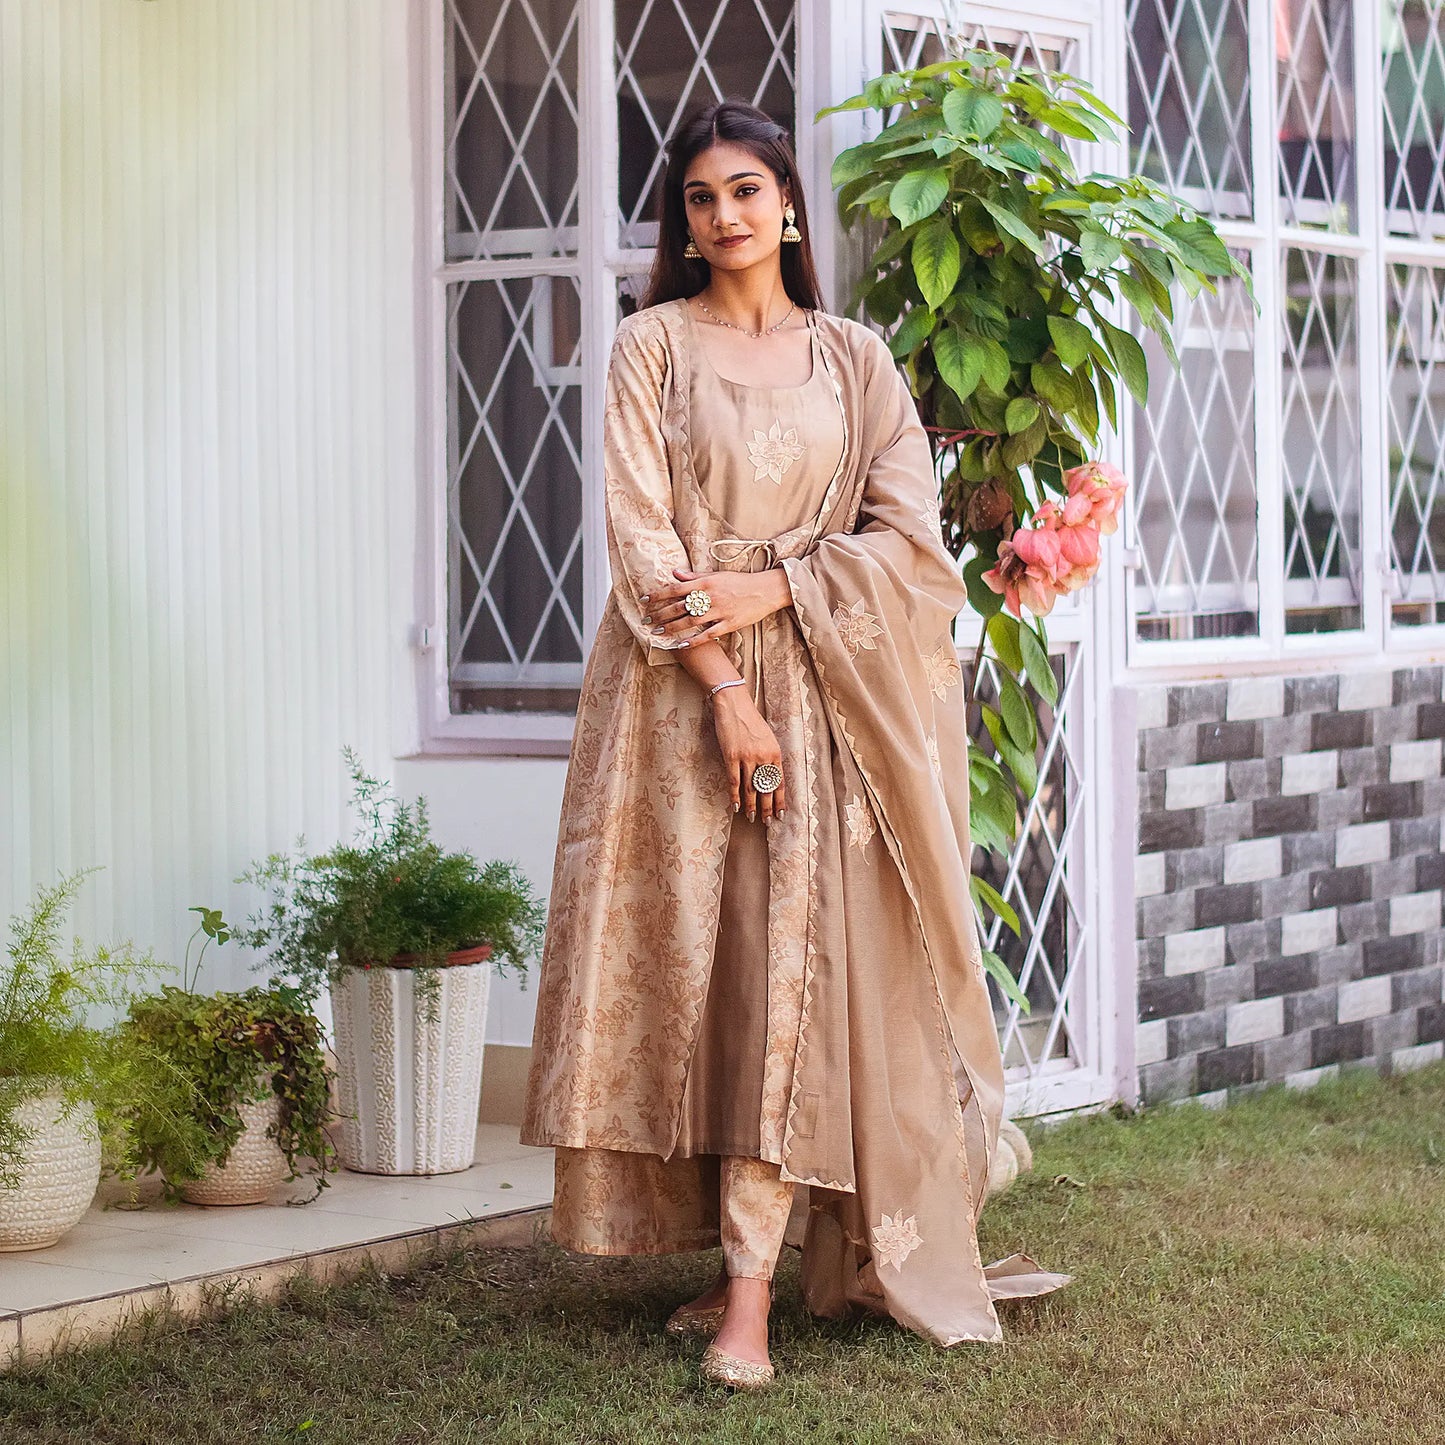 Complete ensemble of the beige floral print kurta set, including the angrakha kurta, palazzo trousers, and chanderi dupatta, as worn by the model